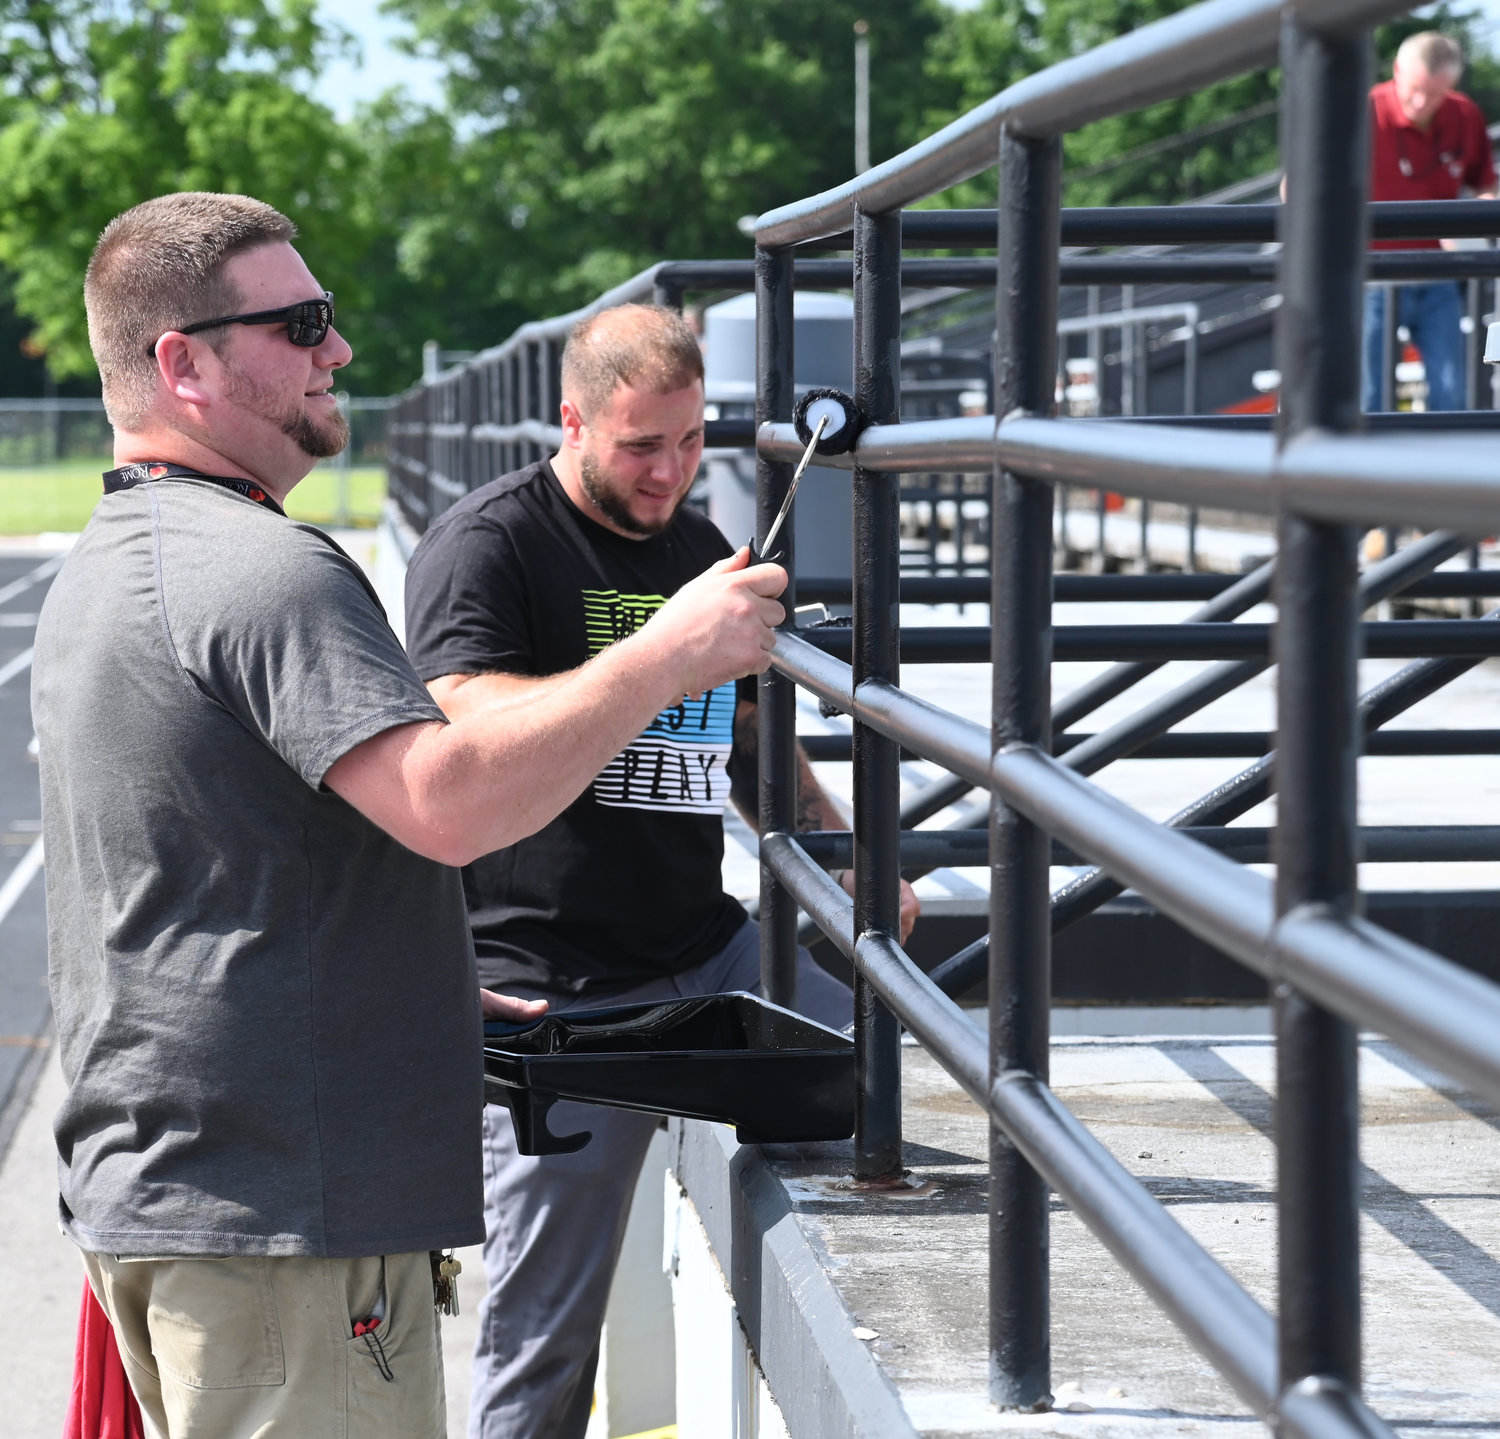 Andrew Castle and Joe Meola both from the Rome City School district paint the railings at RFA Stadium in preparation for next weeks' graduation ceremony.